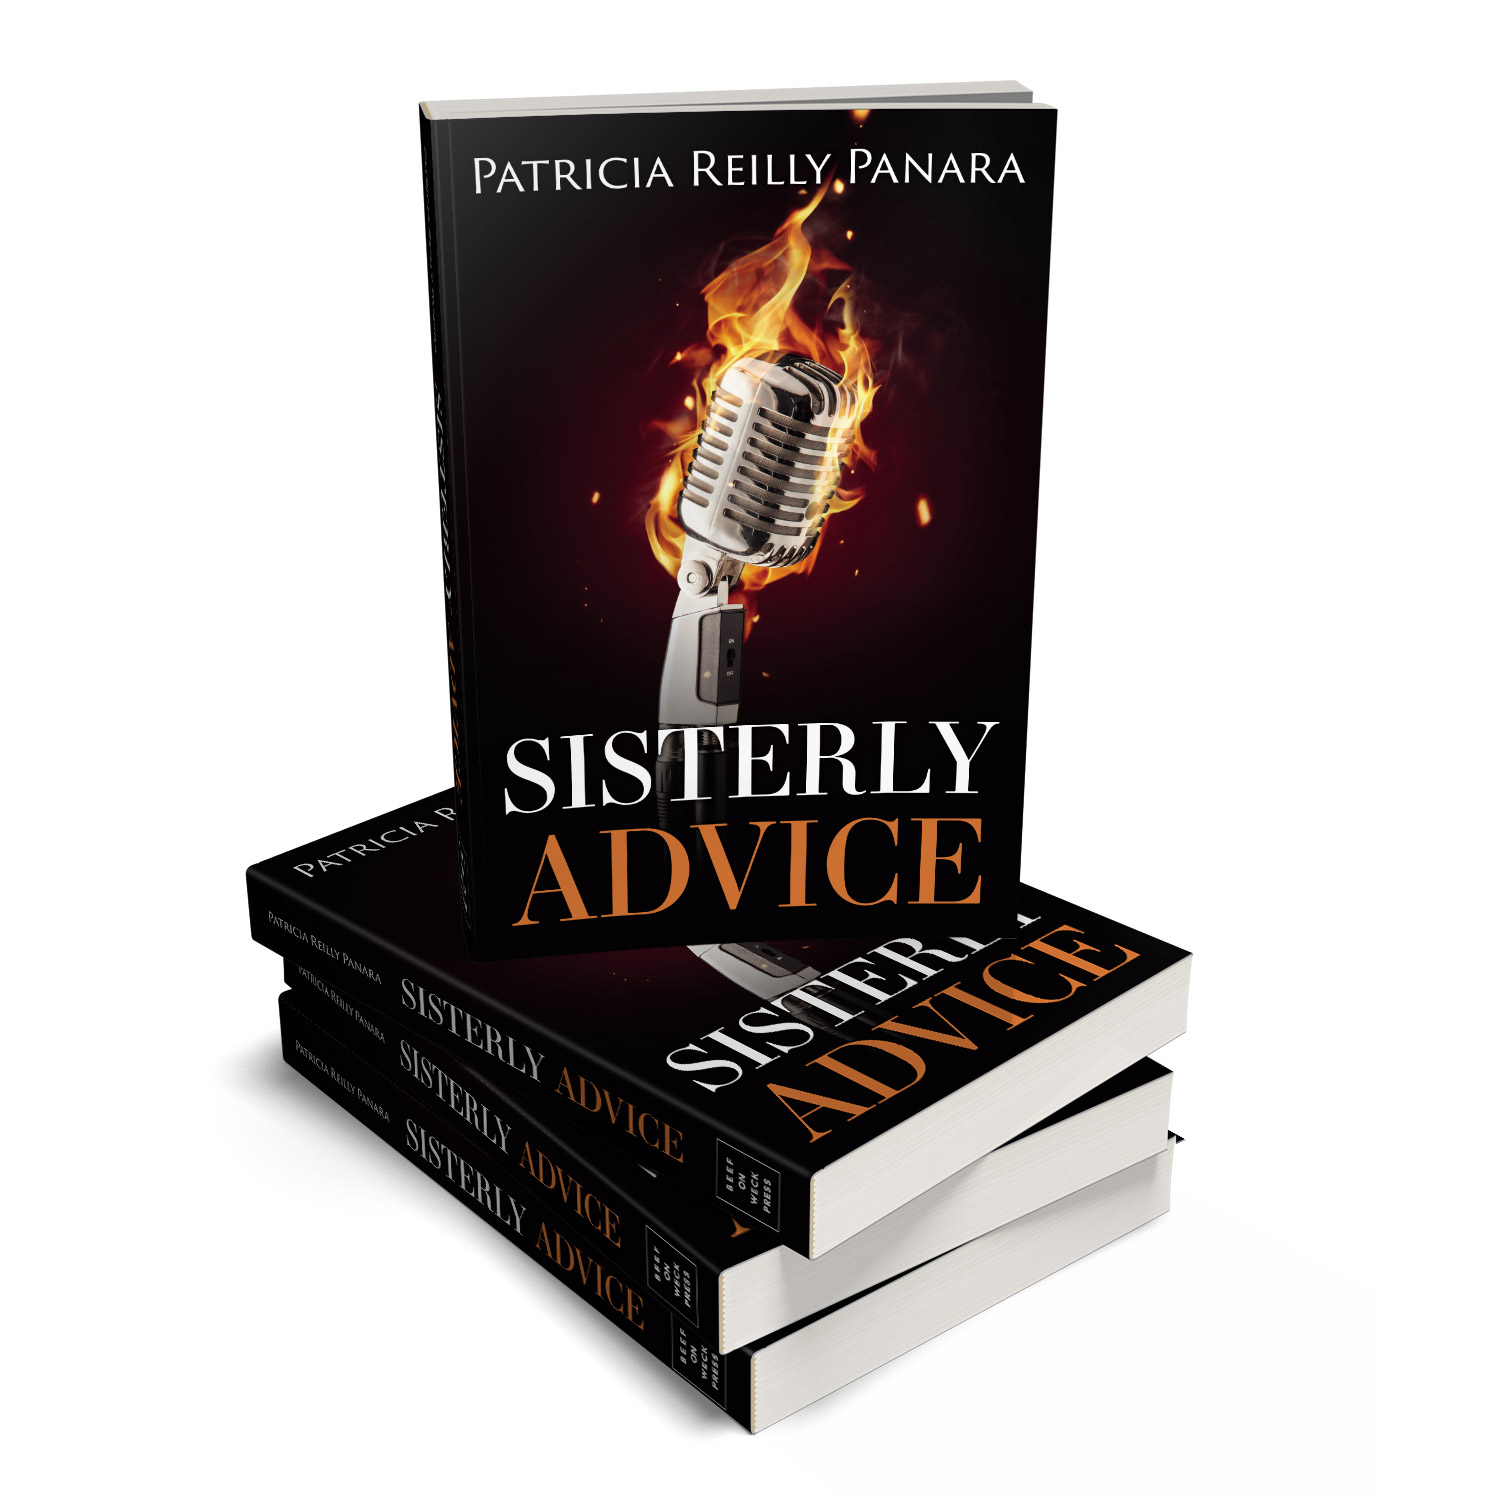 'Sisterly Advice' is the fictional, faith-based story of popular Nun DJ. The author is Patricia Reilly Panara. The book cover and interior were designed by Mark Thomas, of coverness.com. To find out more about my book design services, please visit www.coverness.com.